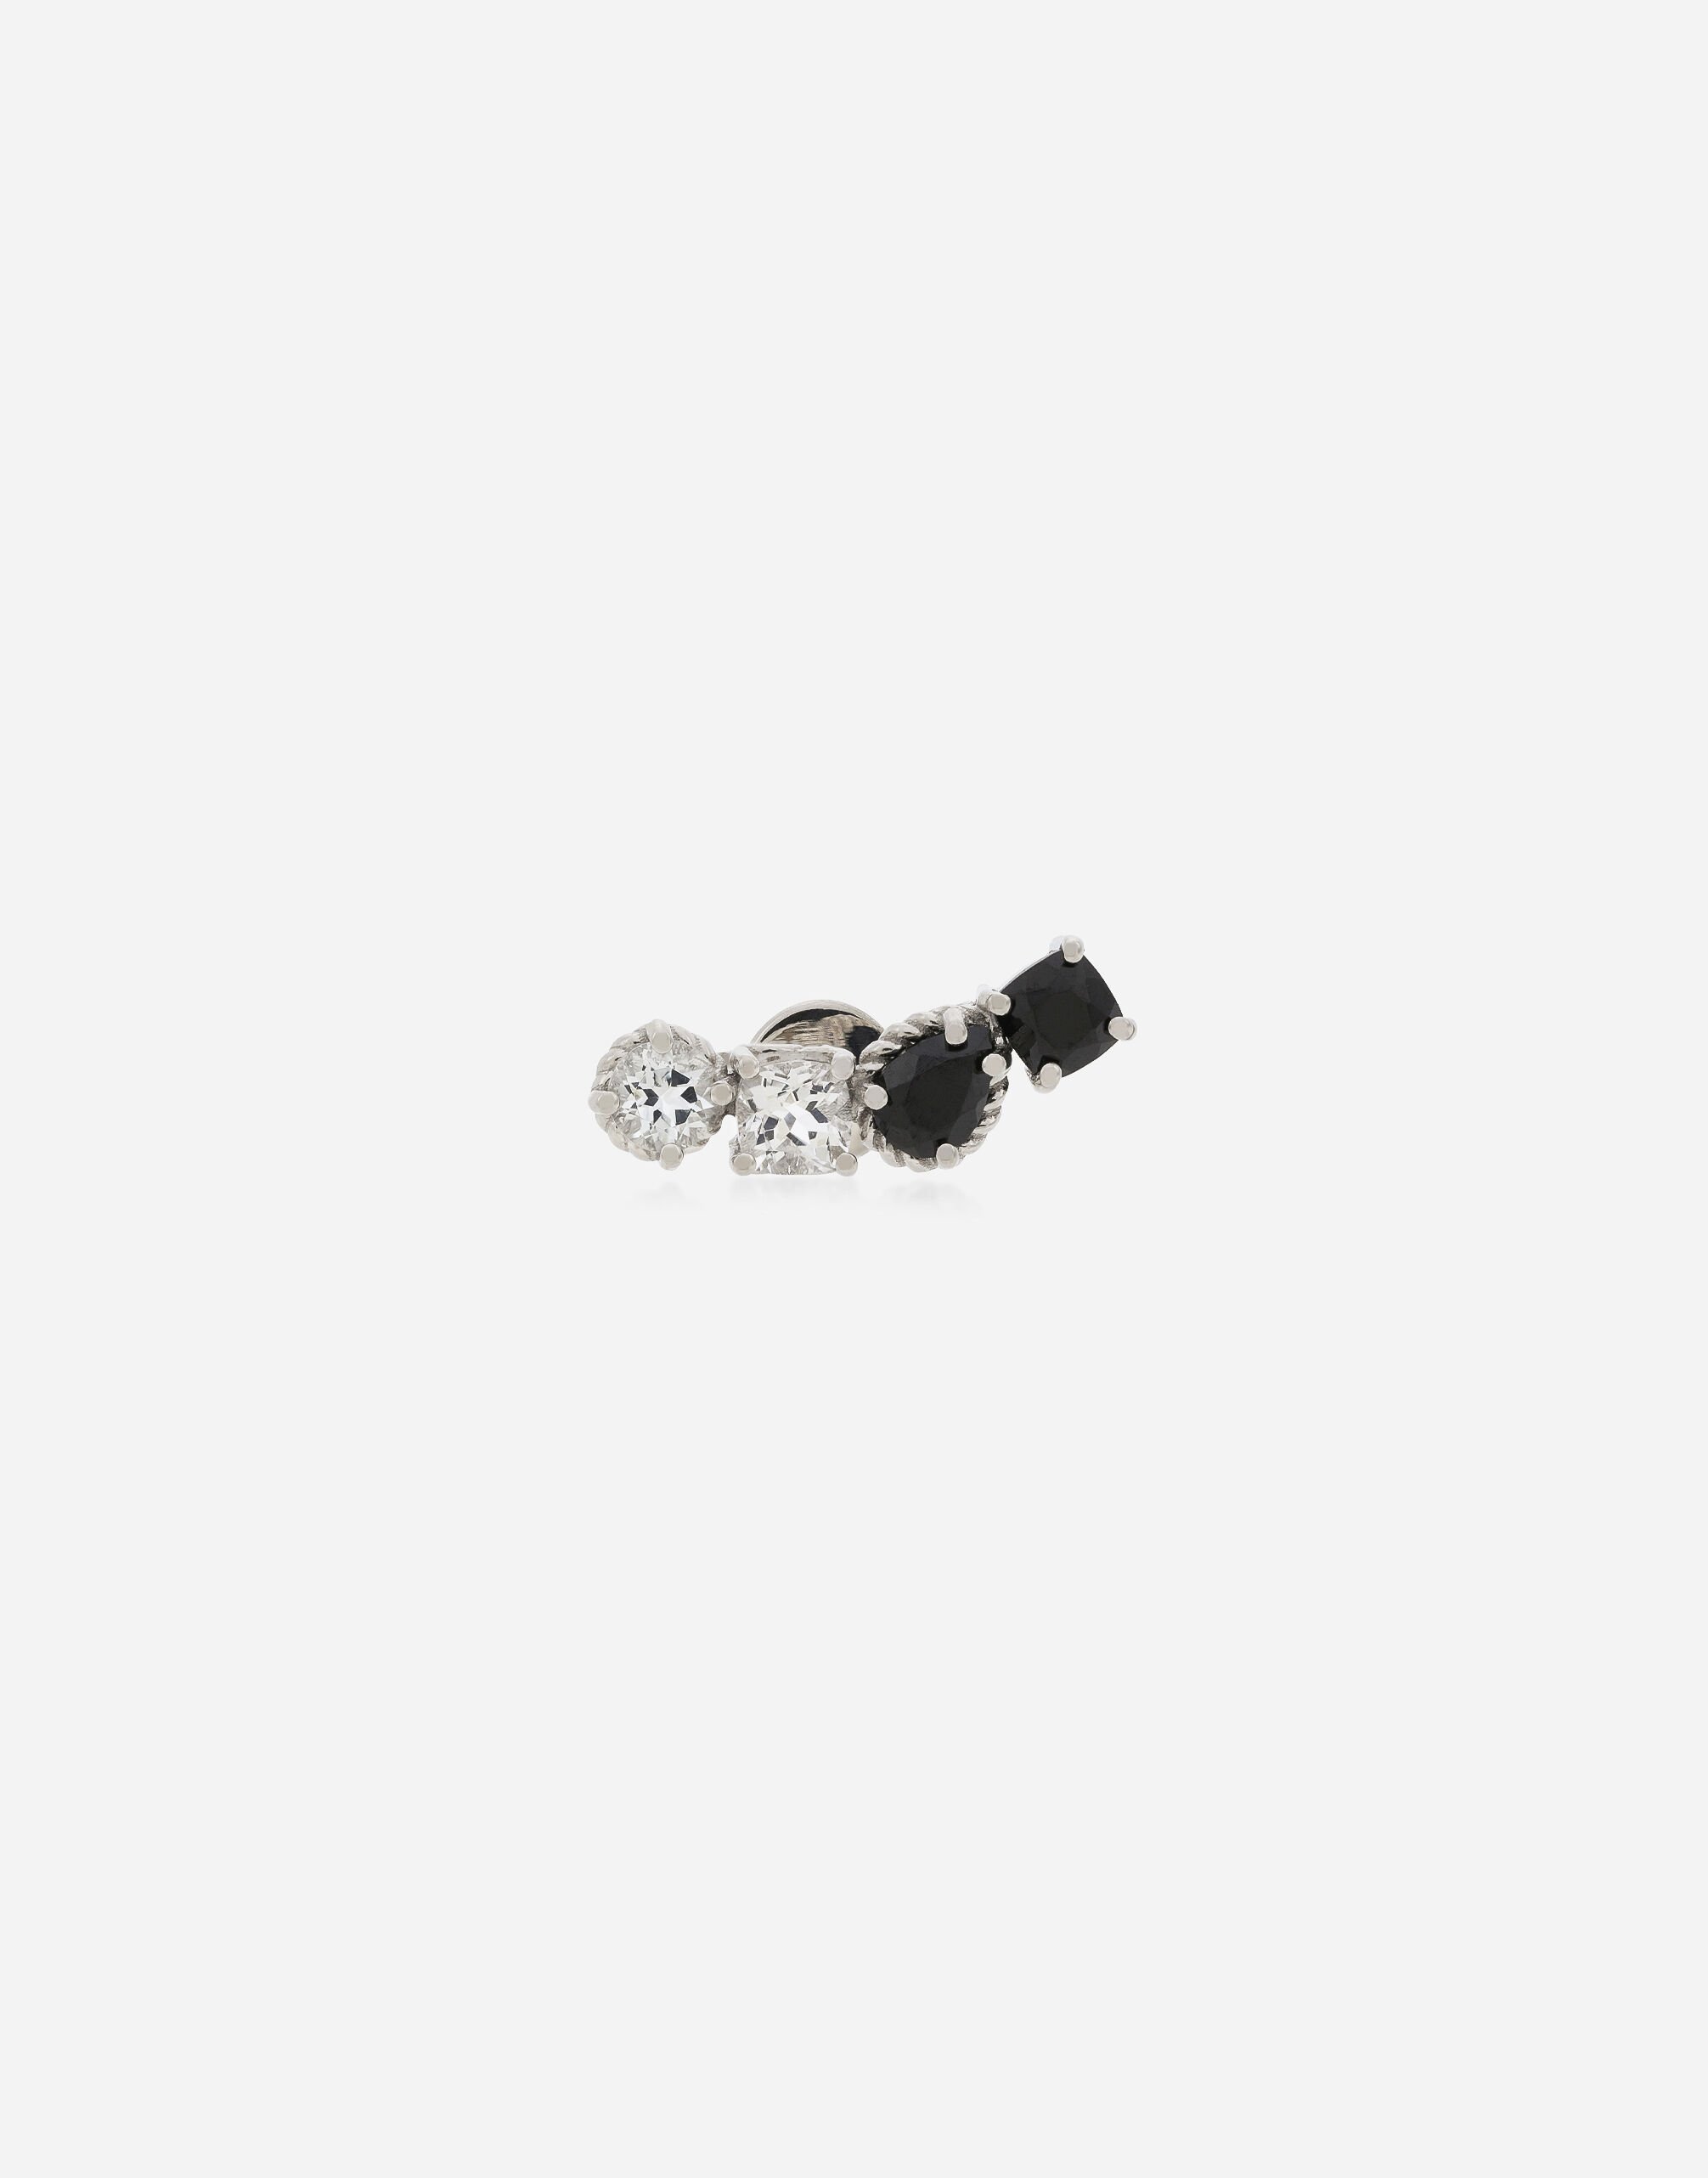 ${brand} Single earring in white gold 18kt with colourless topazes and black spinels ${colorDescription} ${masterID}